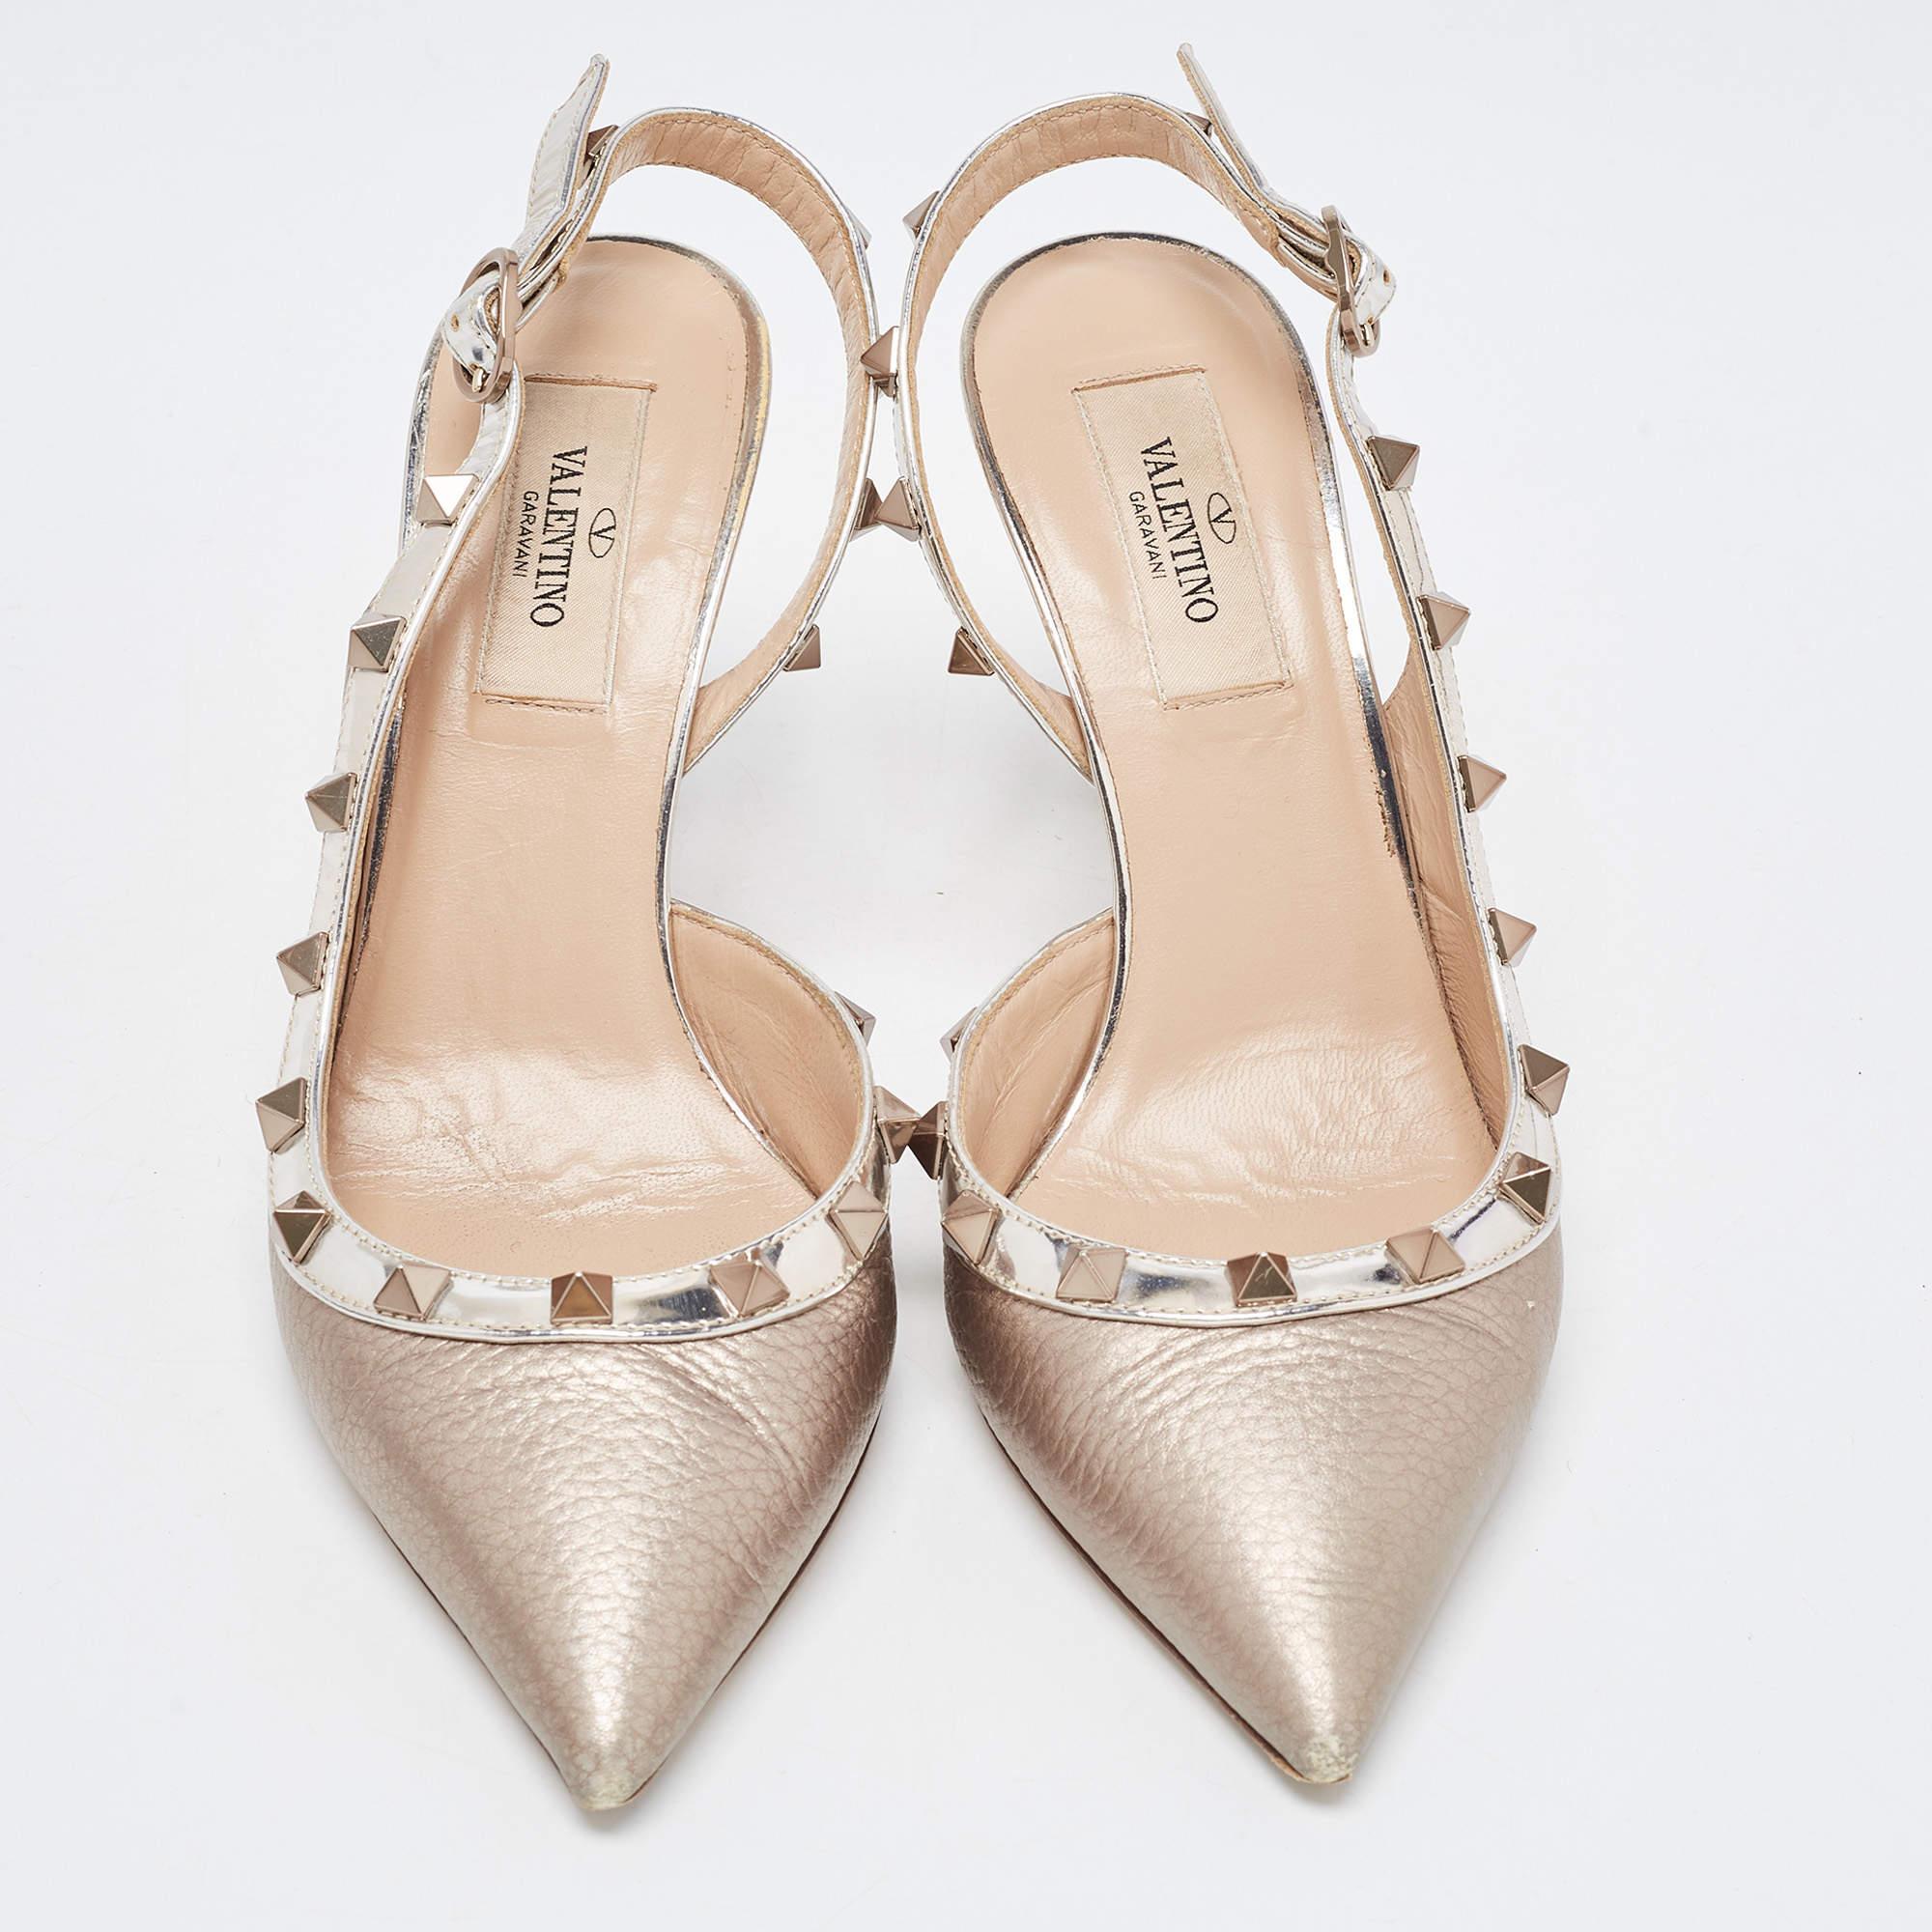 With meticulous craftsmanship and glamorous details, this Valentino pair of pumps reflects the brand's expertise in creating innovative and admirable designs. The Rockstuds elegantly outlines the upper straps and make it undeniably chic. Created